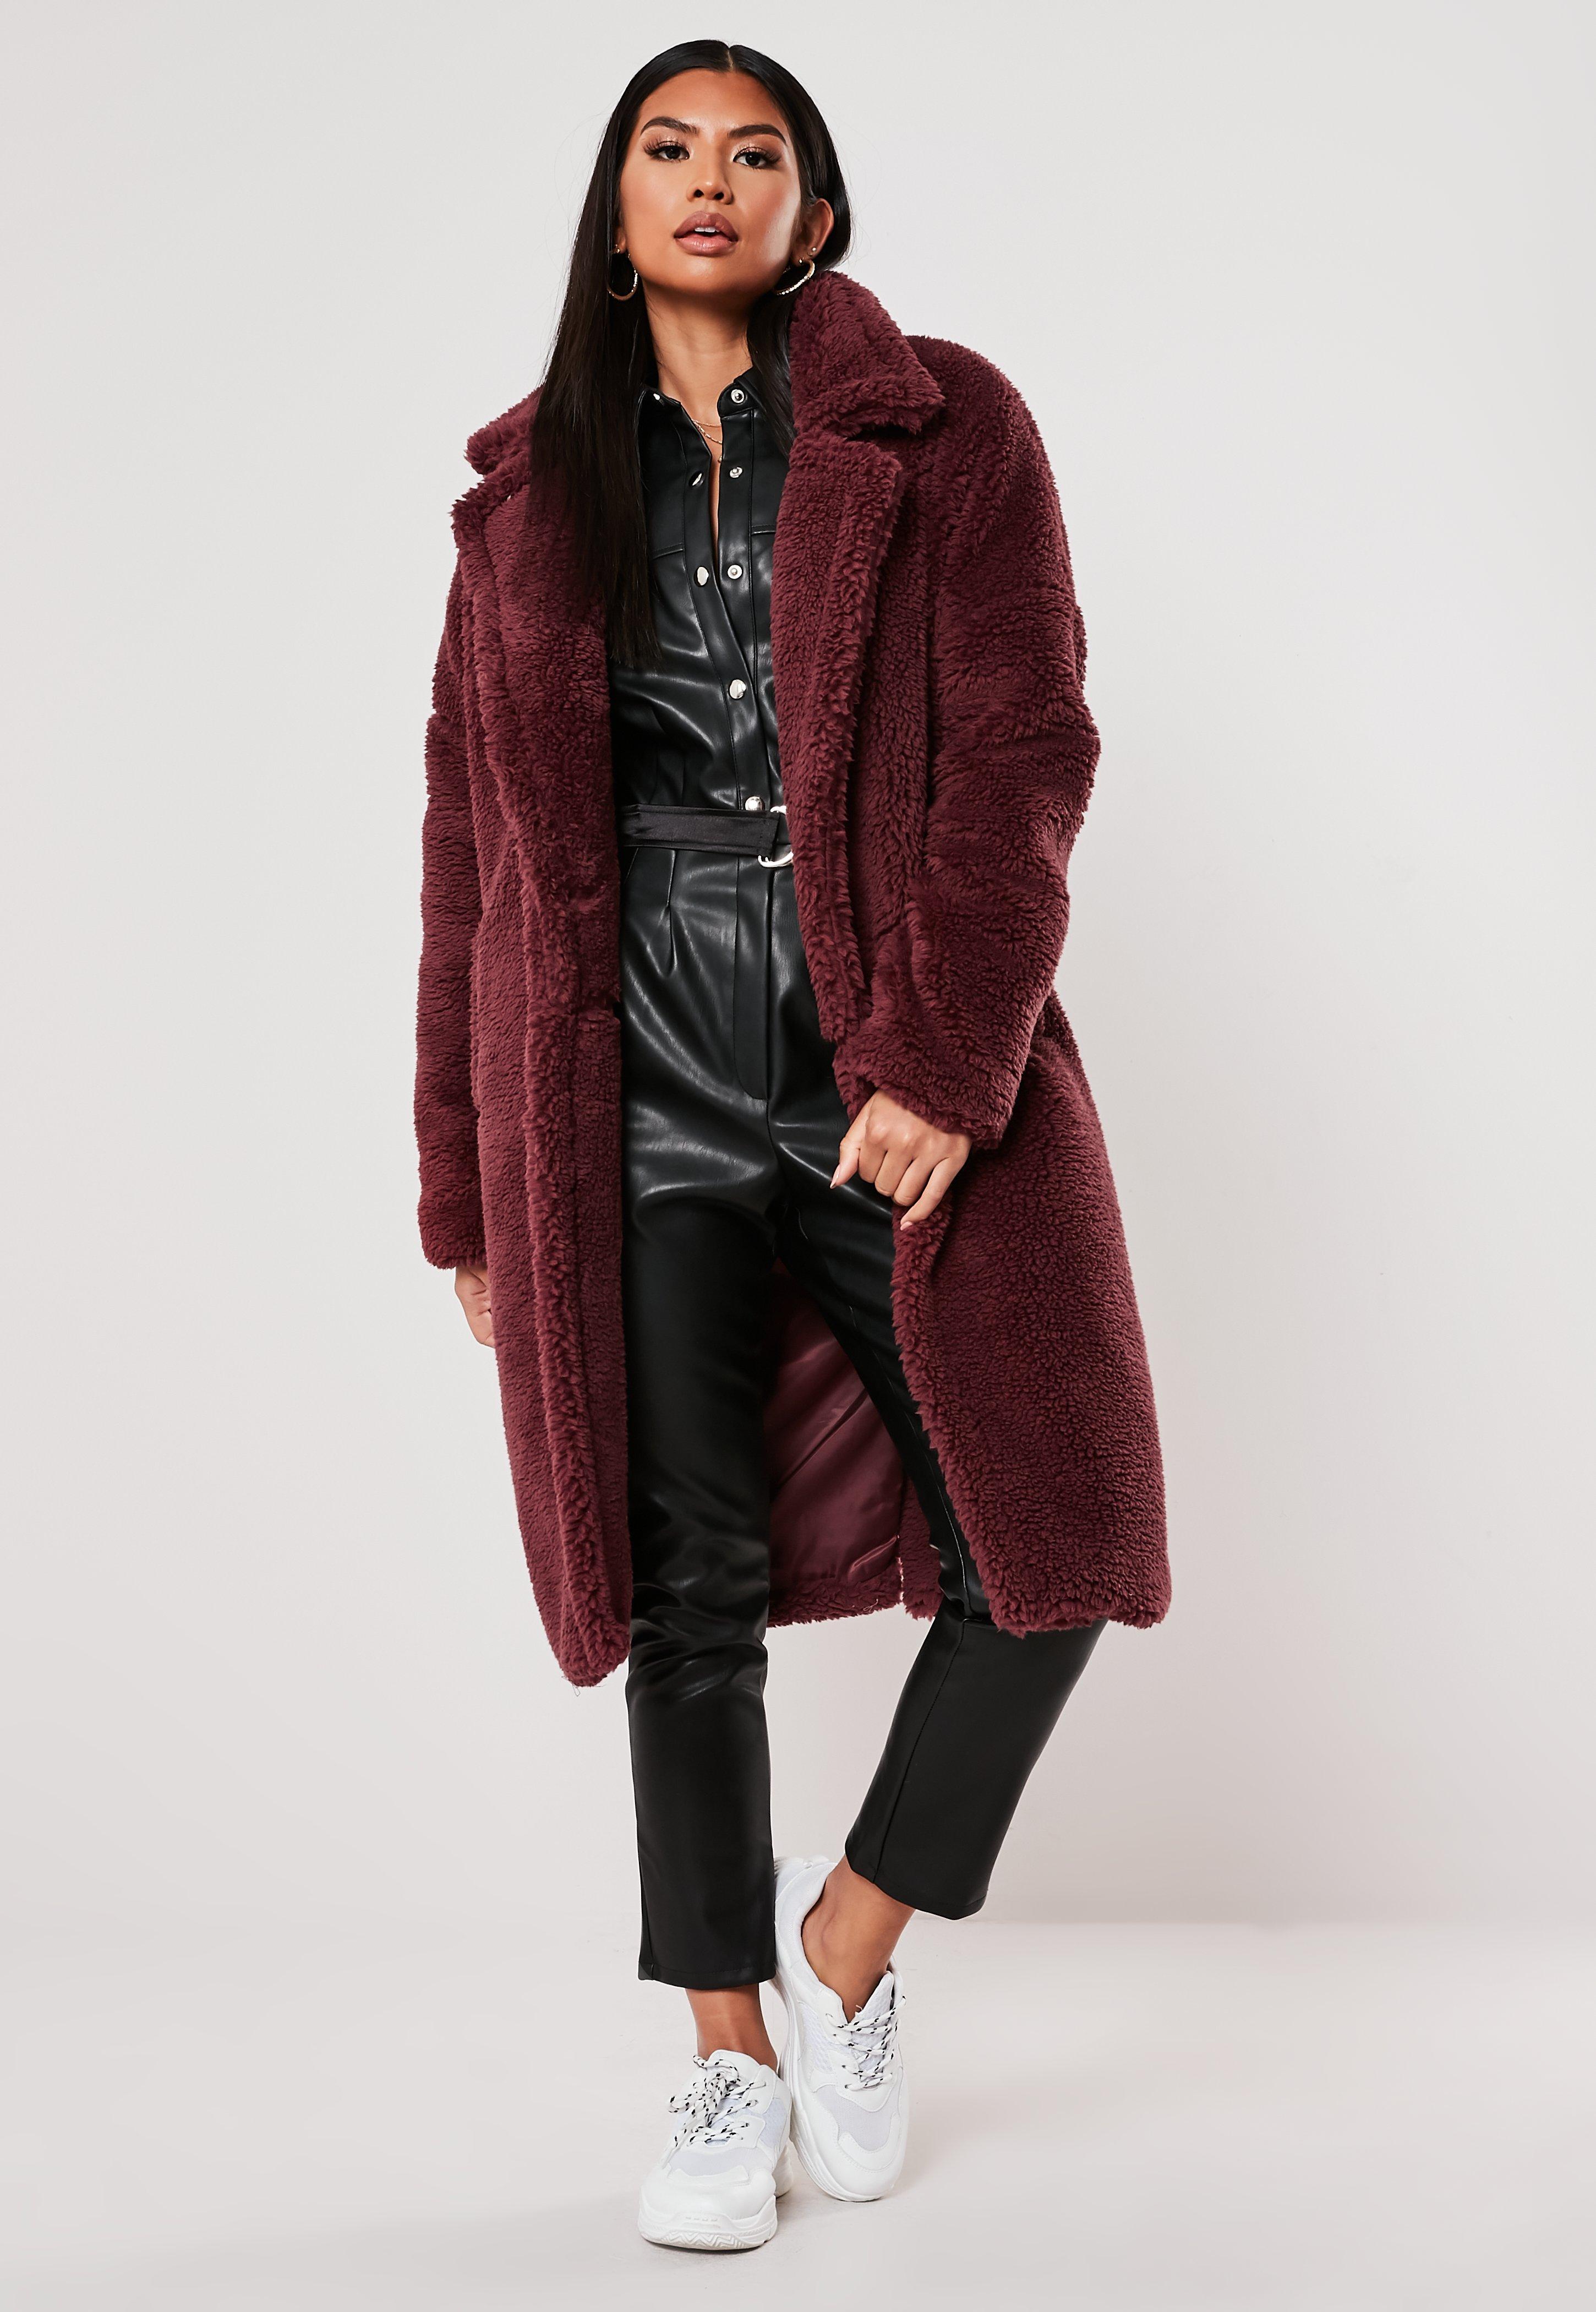 Missguided Synthetic Wine Borg Teddy Oversized Coat in Red - Lyst